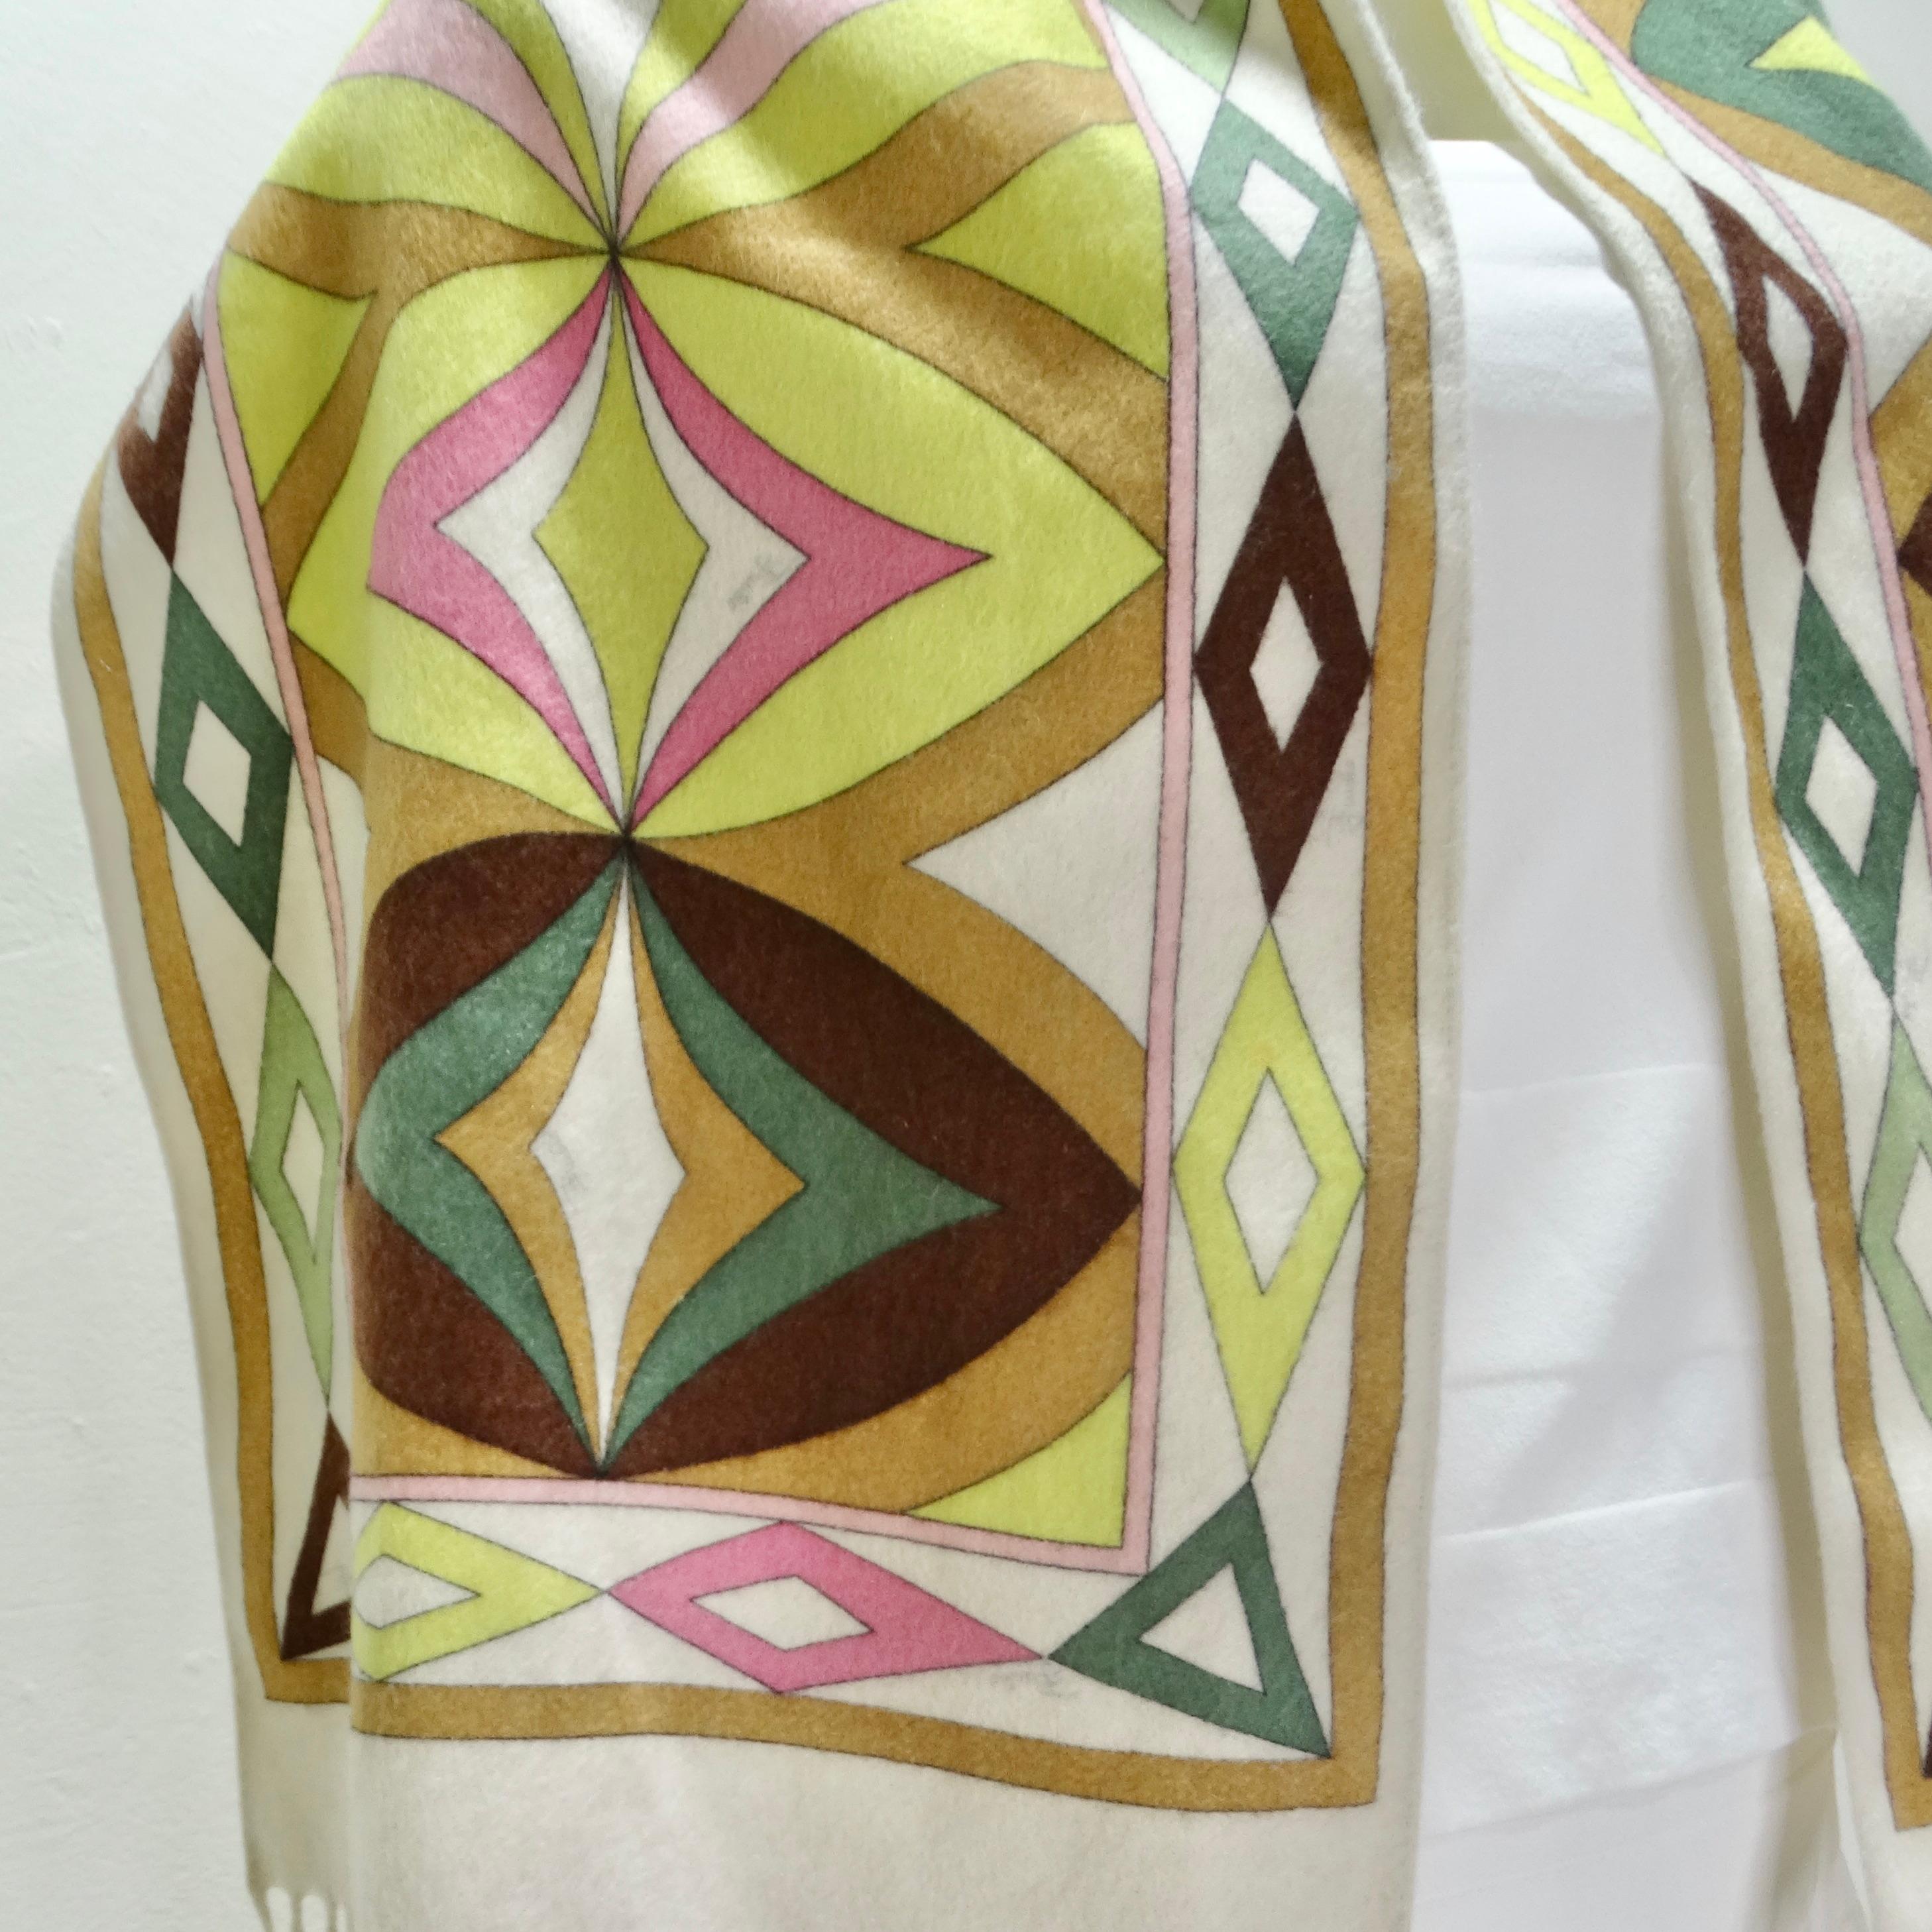 Introducing a scarf that's not just an accessory but a work of art - the Emilio Pucci 1980s Cashmere Scarf. This luxurious cashmere scarf features a white base adorned with an abstract signature Pucci print in vibrant greens, pinks, and neutral